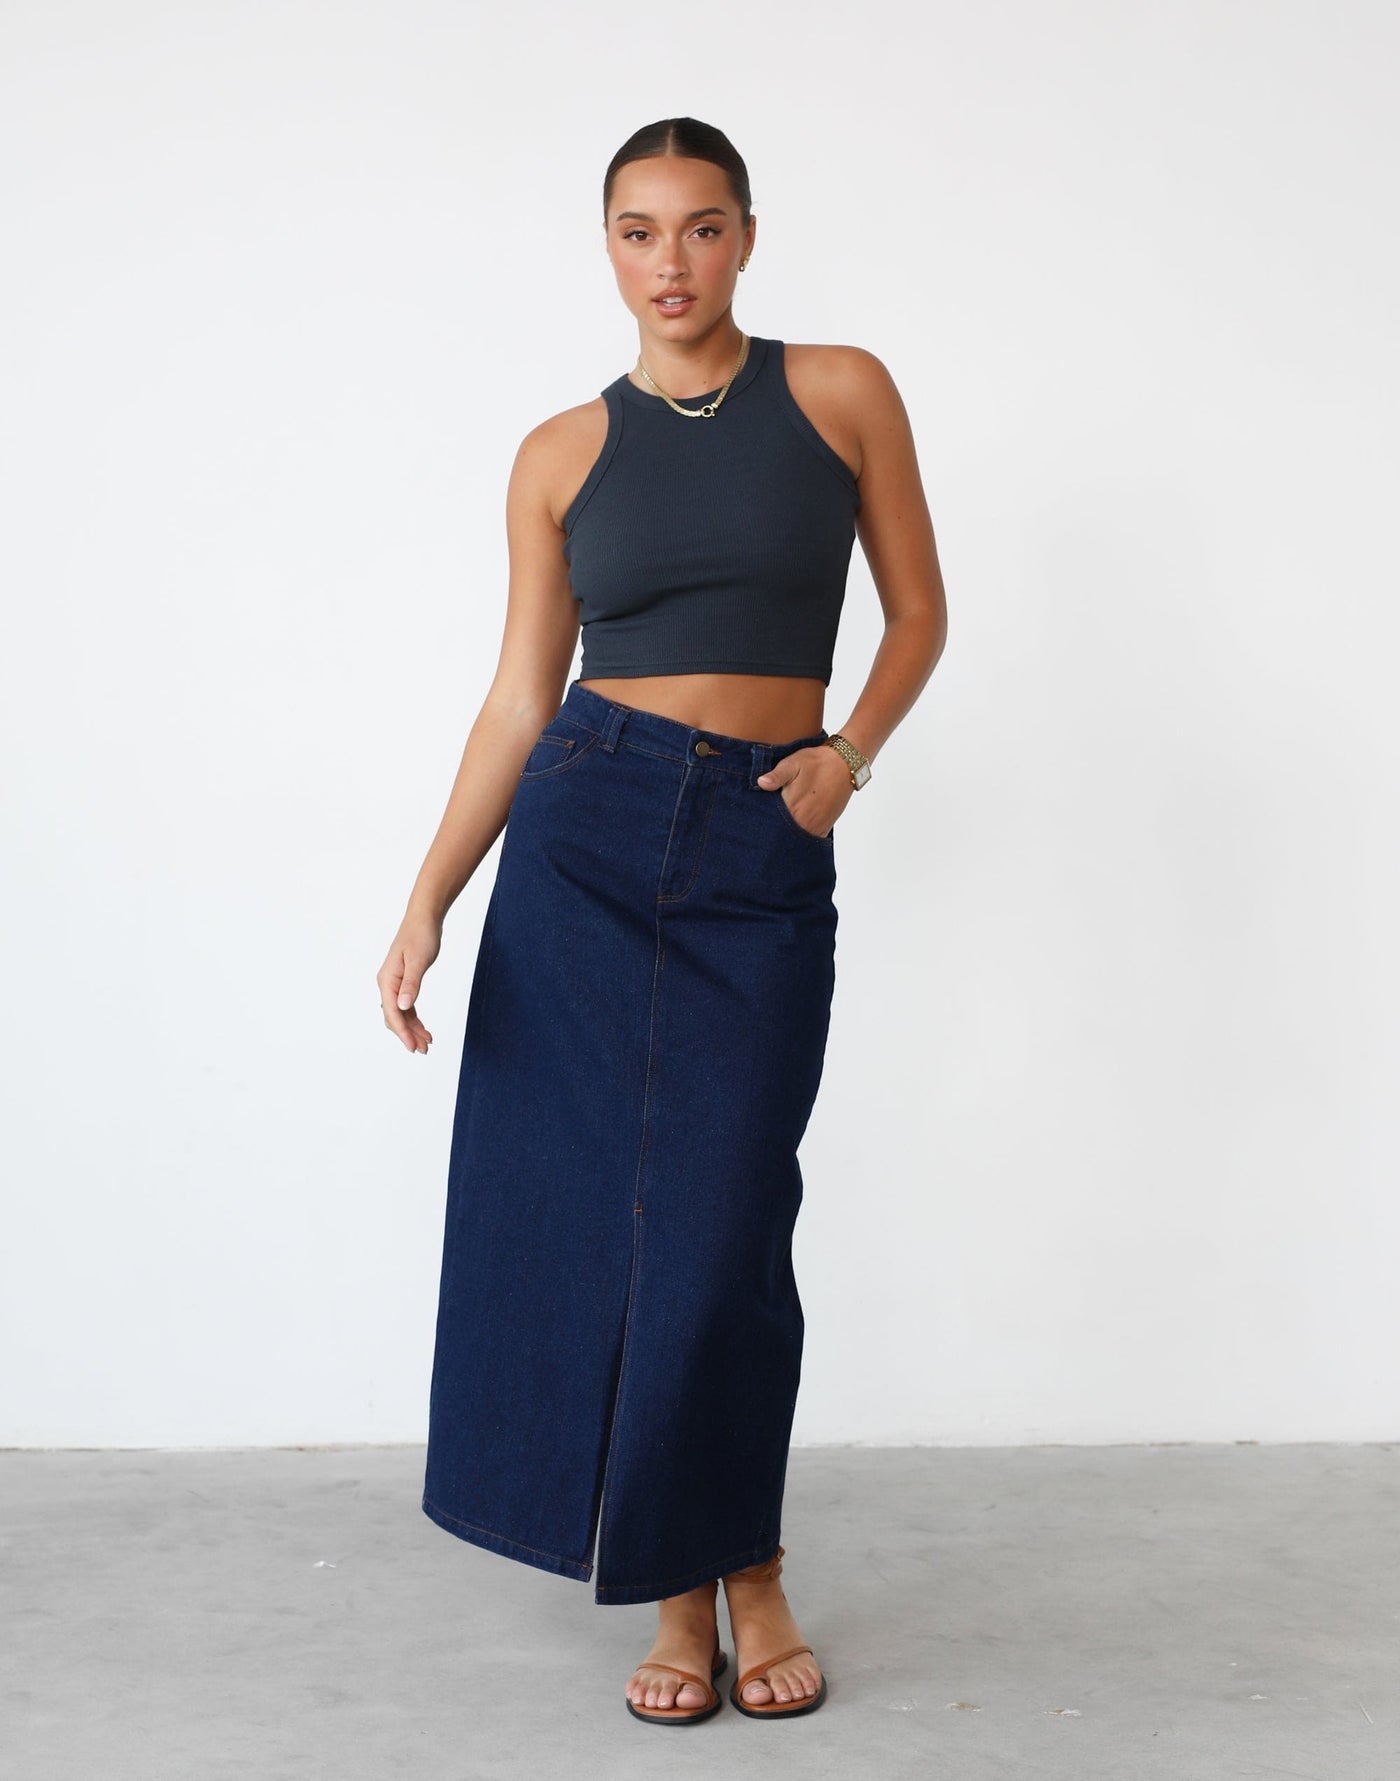 Kennedy Tank Top (Midnight Blue) - Basic Round Neck Crop Top - Women's Top - Charcoal Clothing